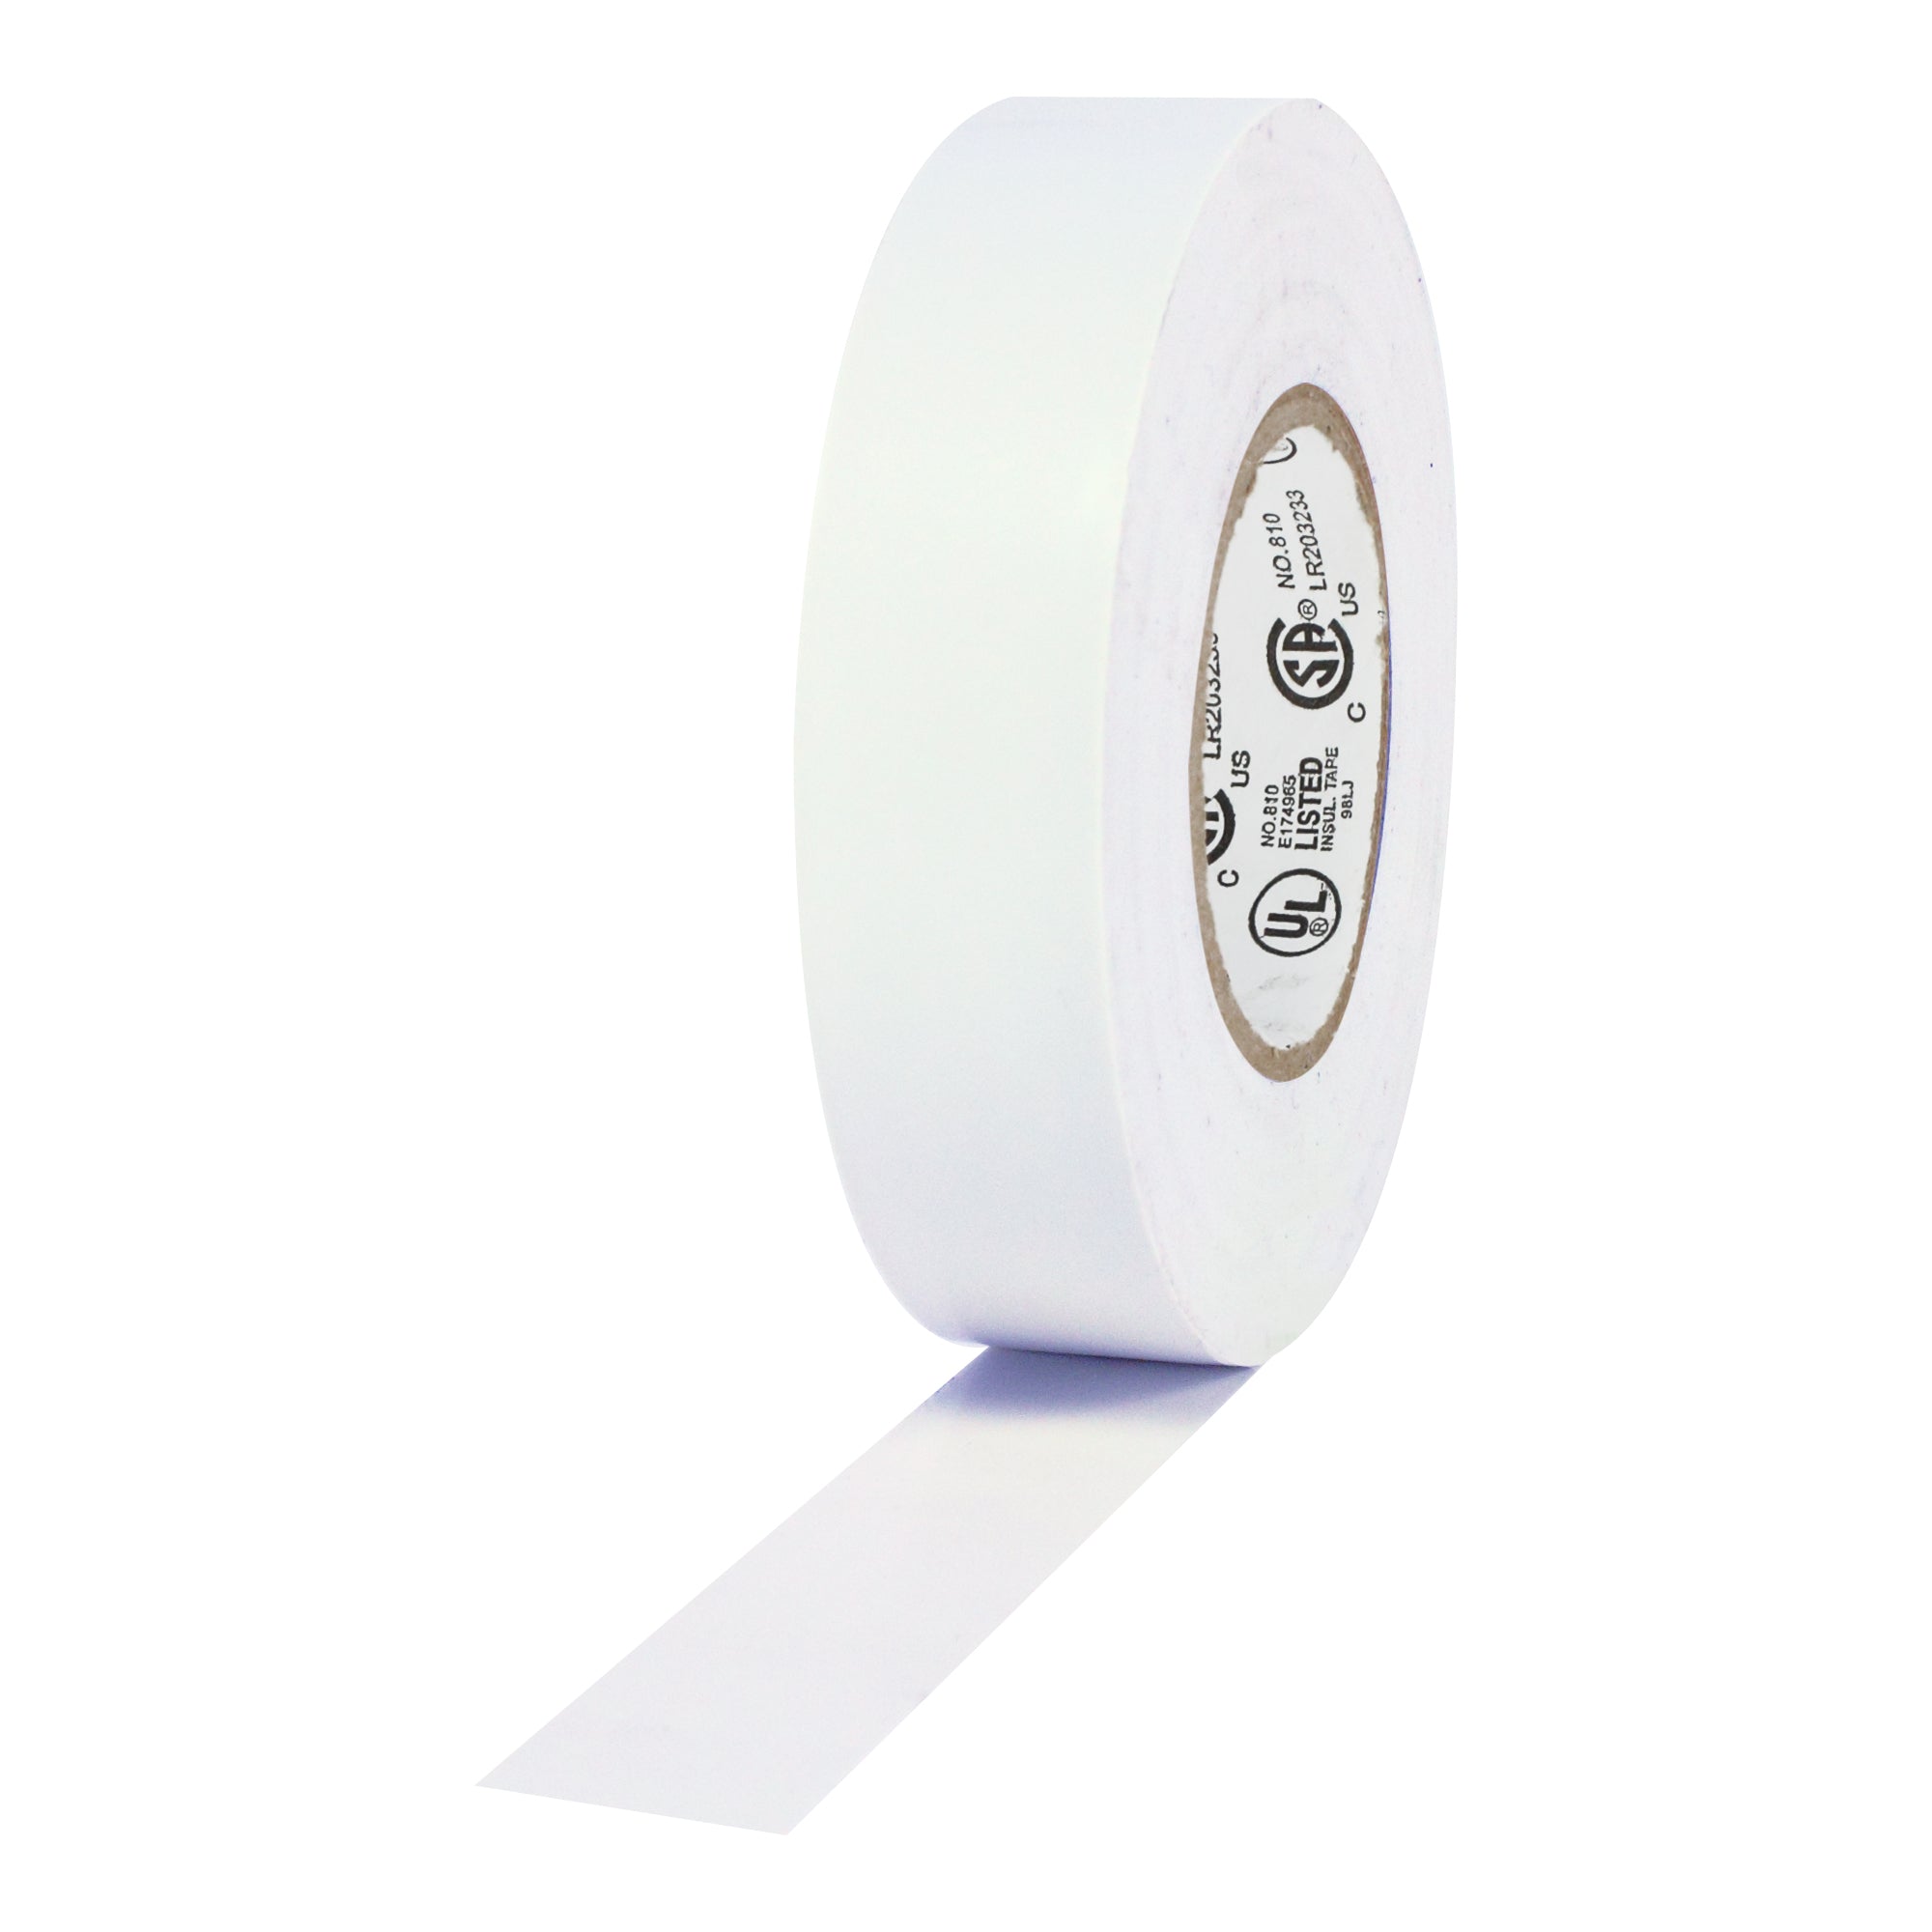 Pro Tapes Pro Plus Electrical Tape - 3/4" x 60', White